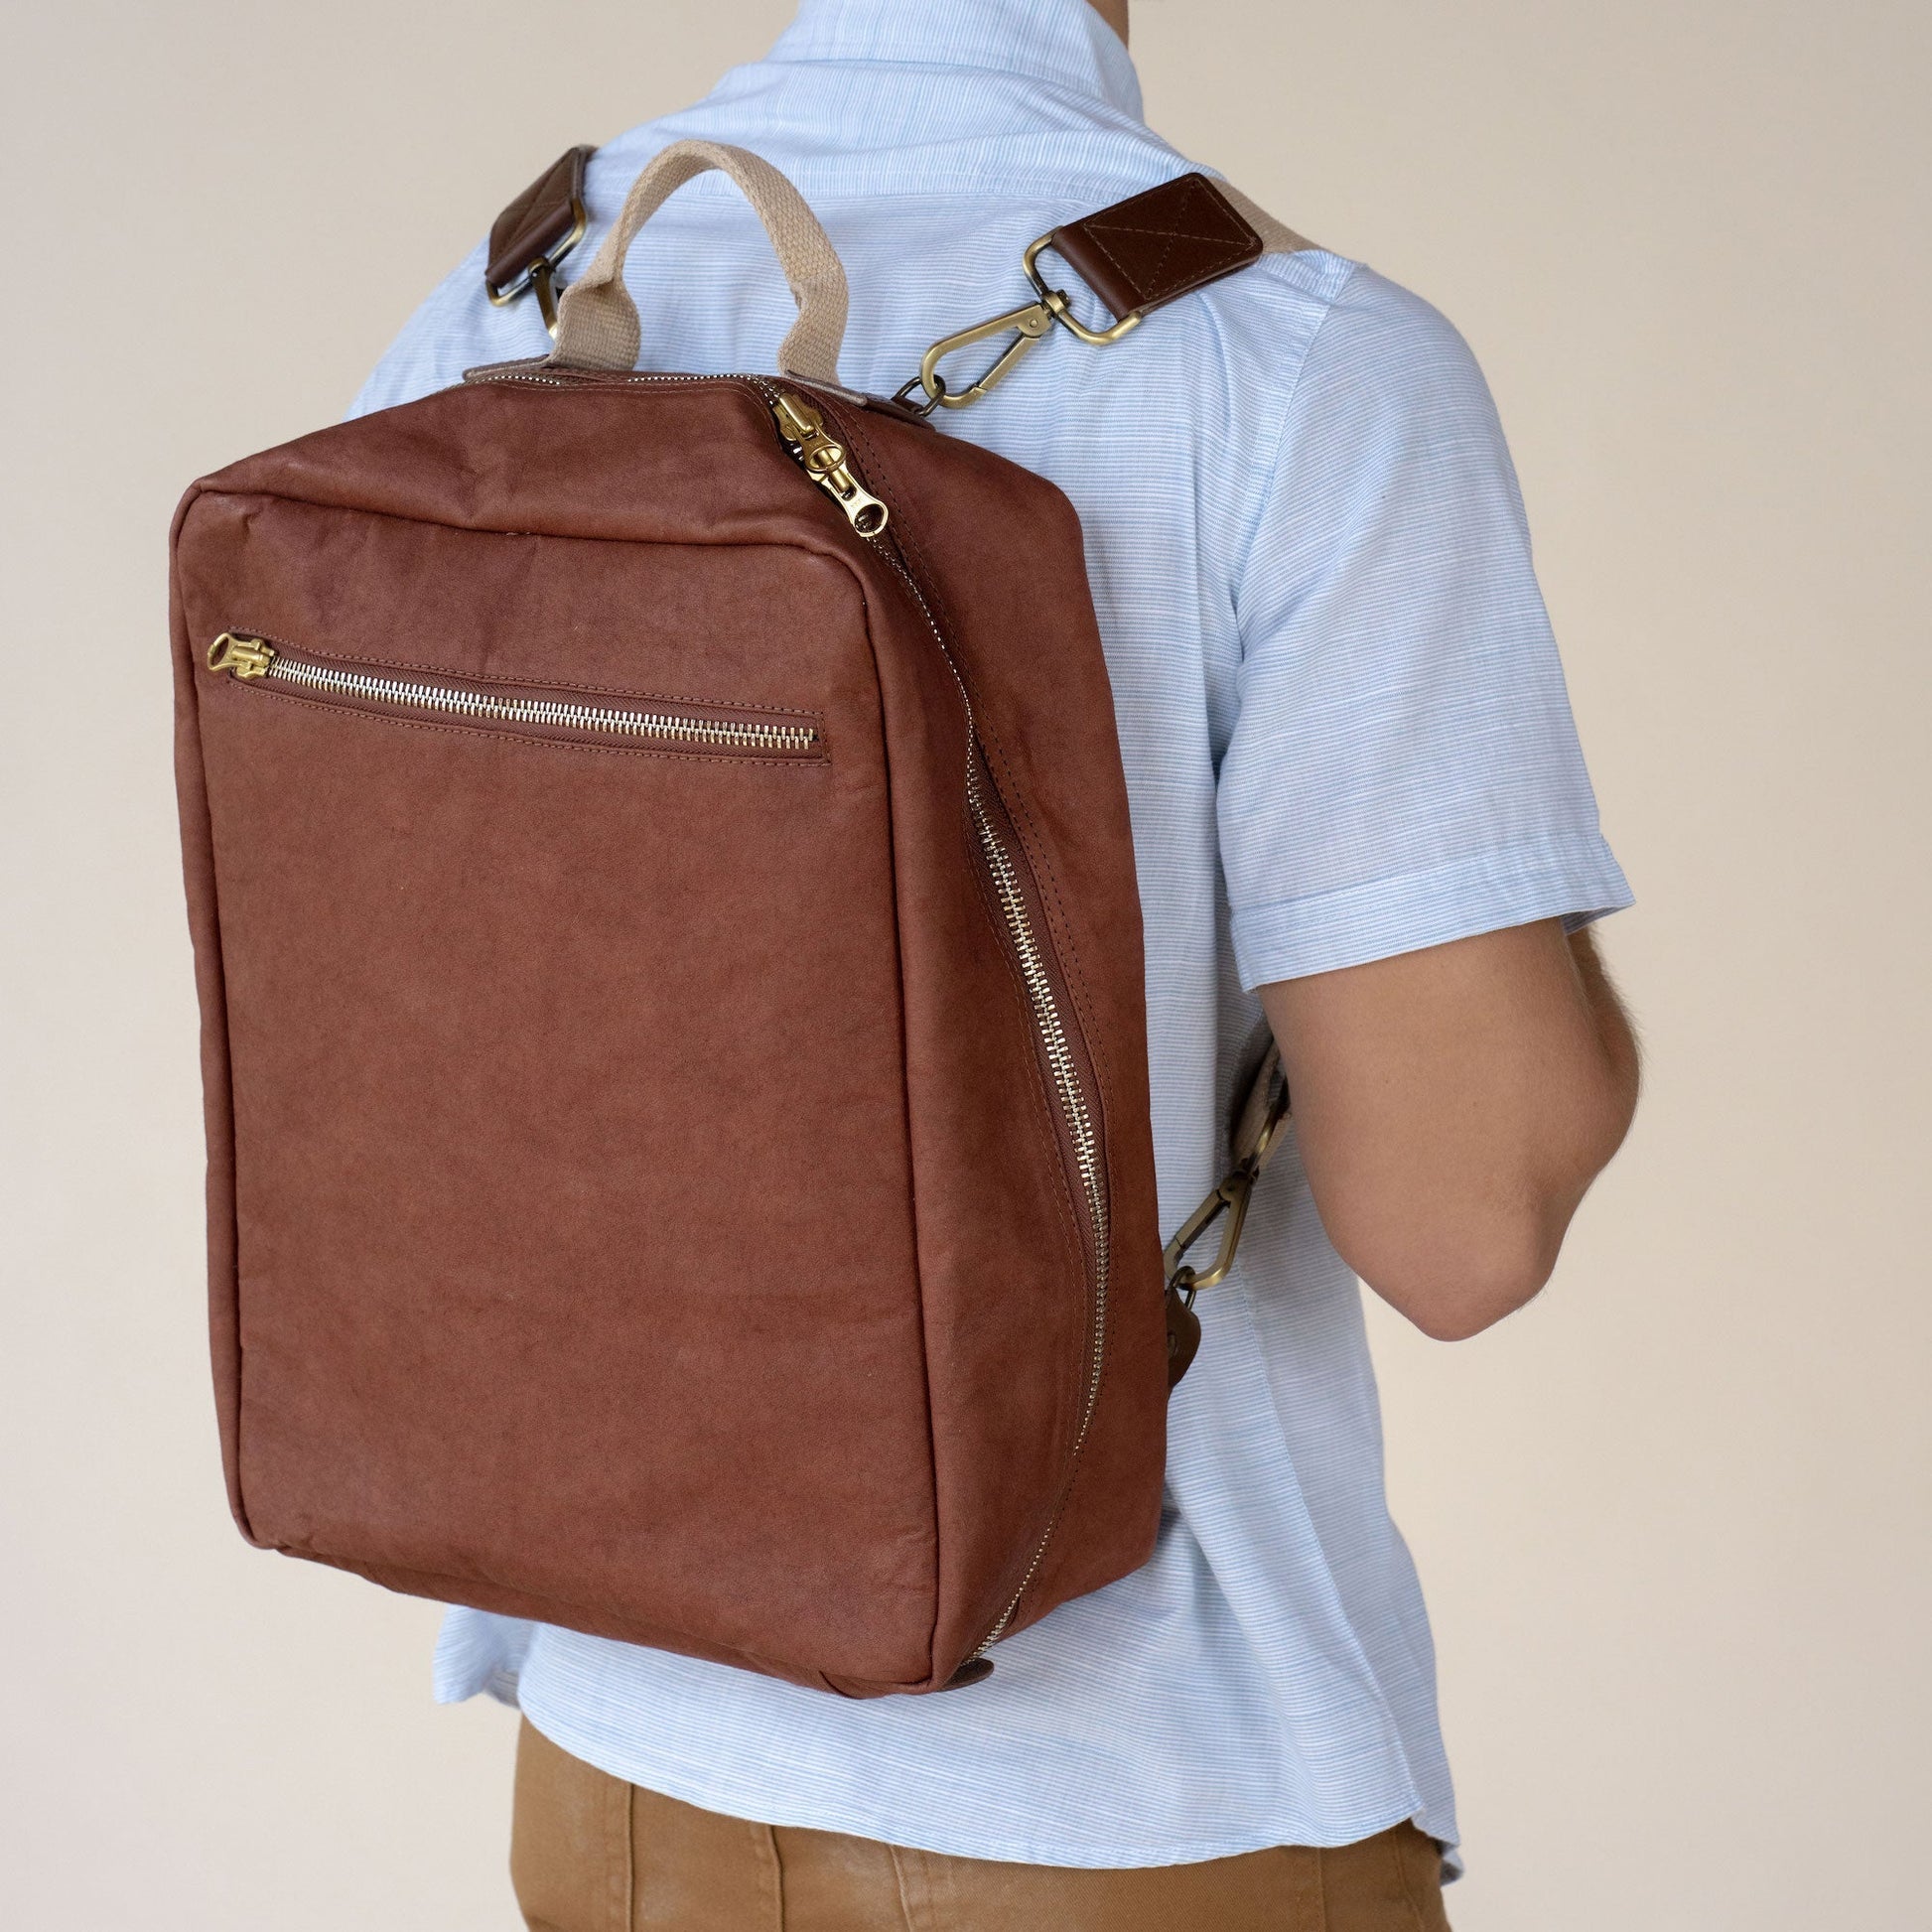 A man is shown standing wearing a square shaped washable paper backpack in a congac colour.